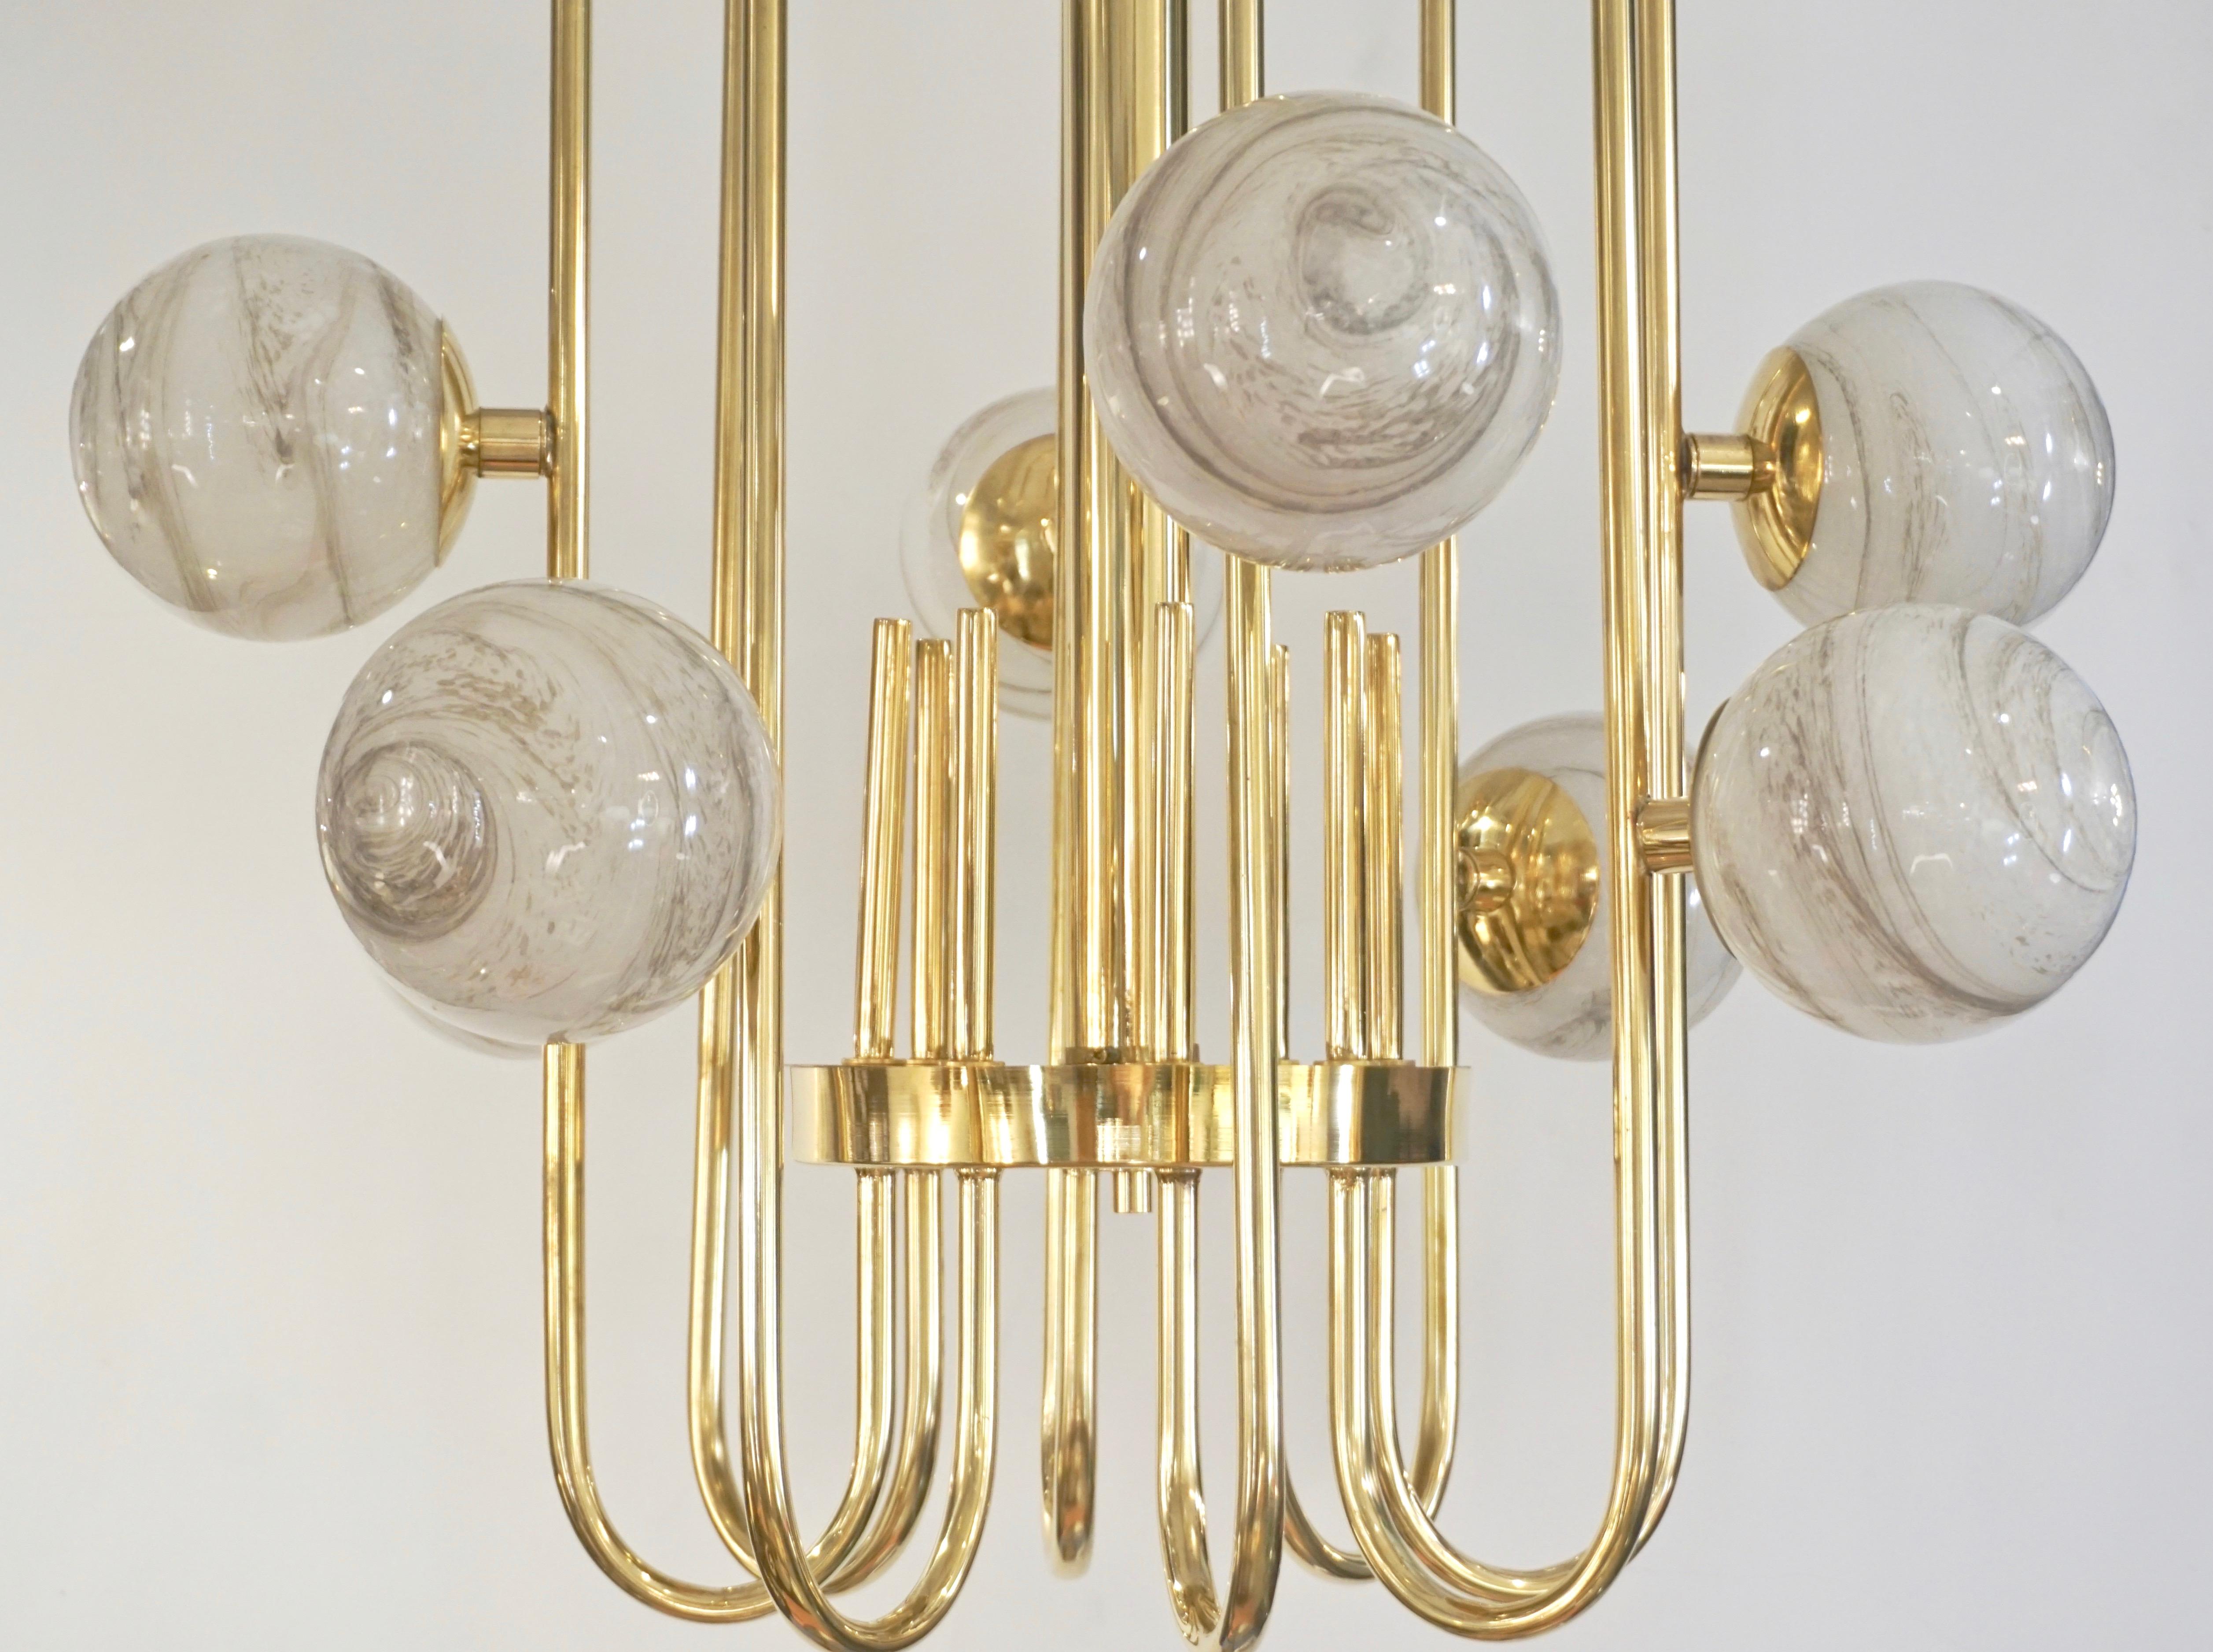 Hand-Crafted Bespoke Italian Alabaster White Murano Glass Brass Curved Globe Chandelier For Sale